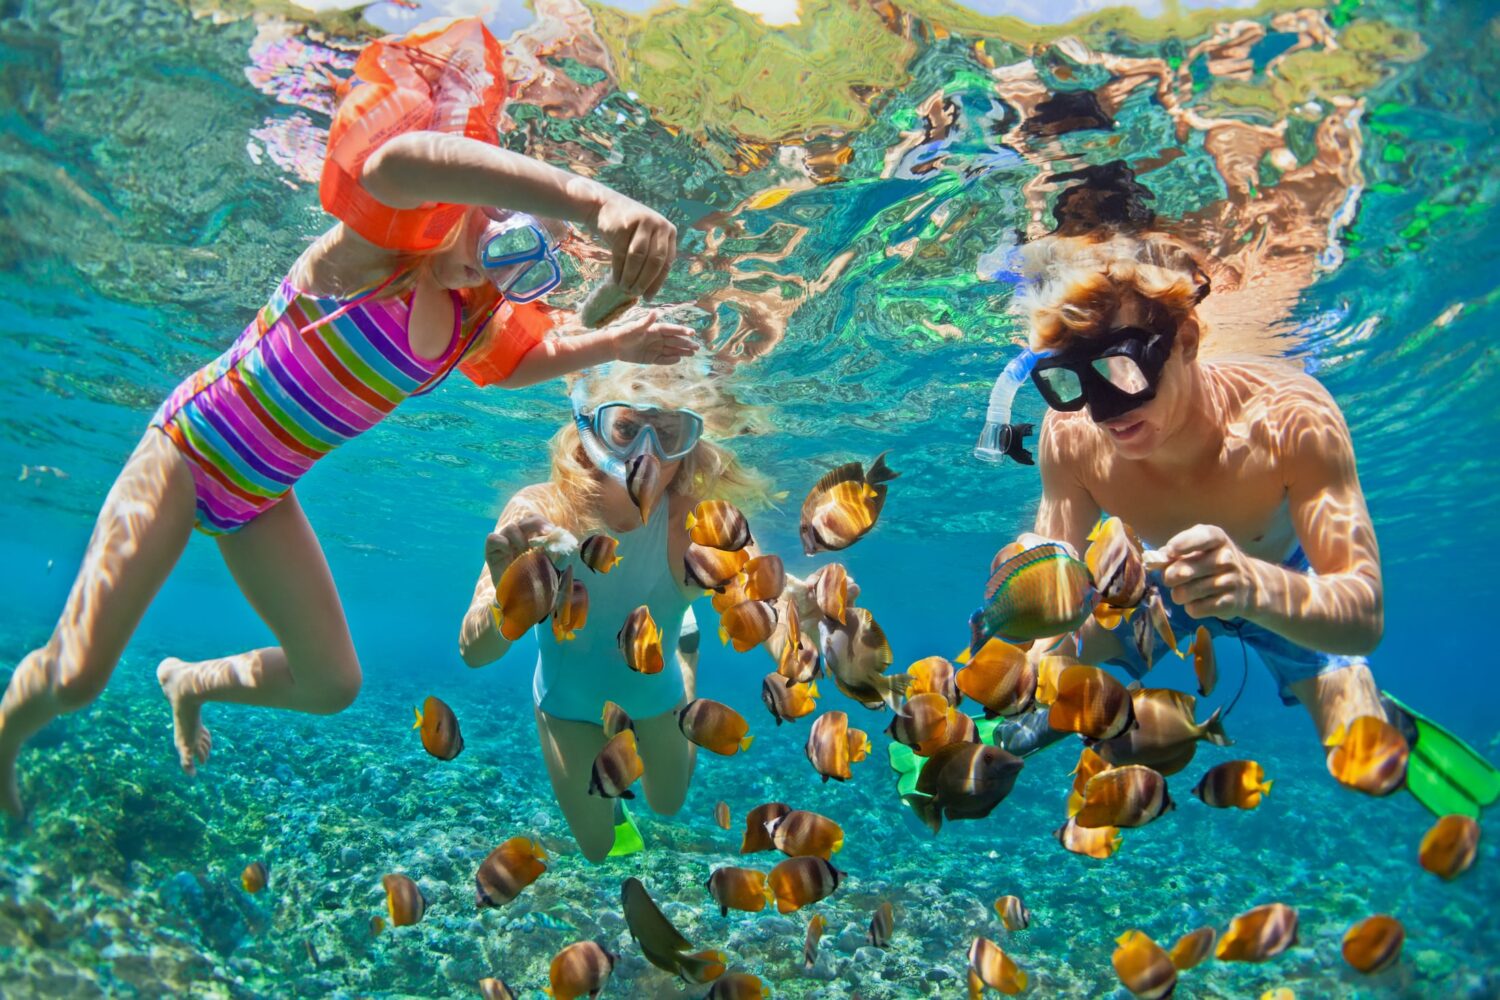 A father and two children snorkeling underwater, observing colorful fish swimming in their natural habitat.